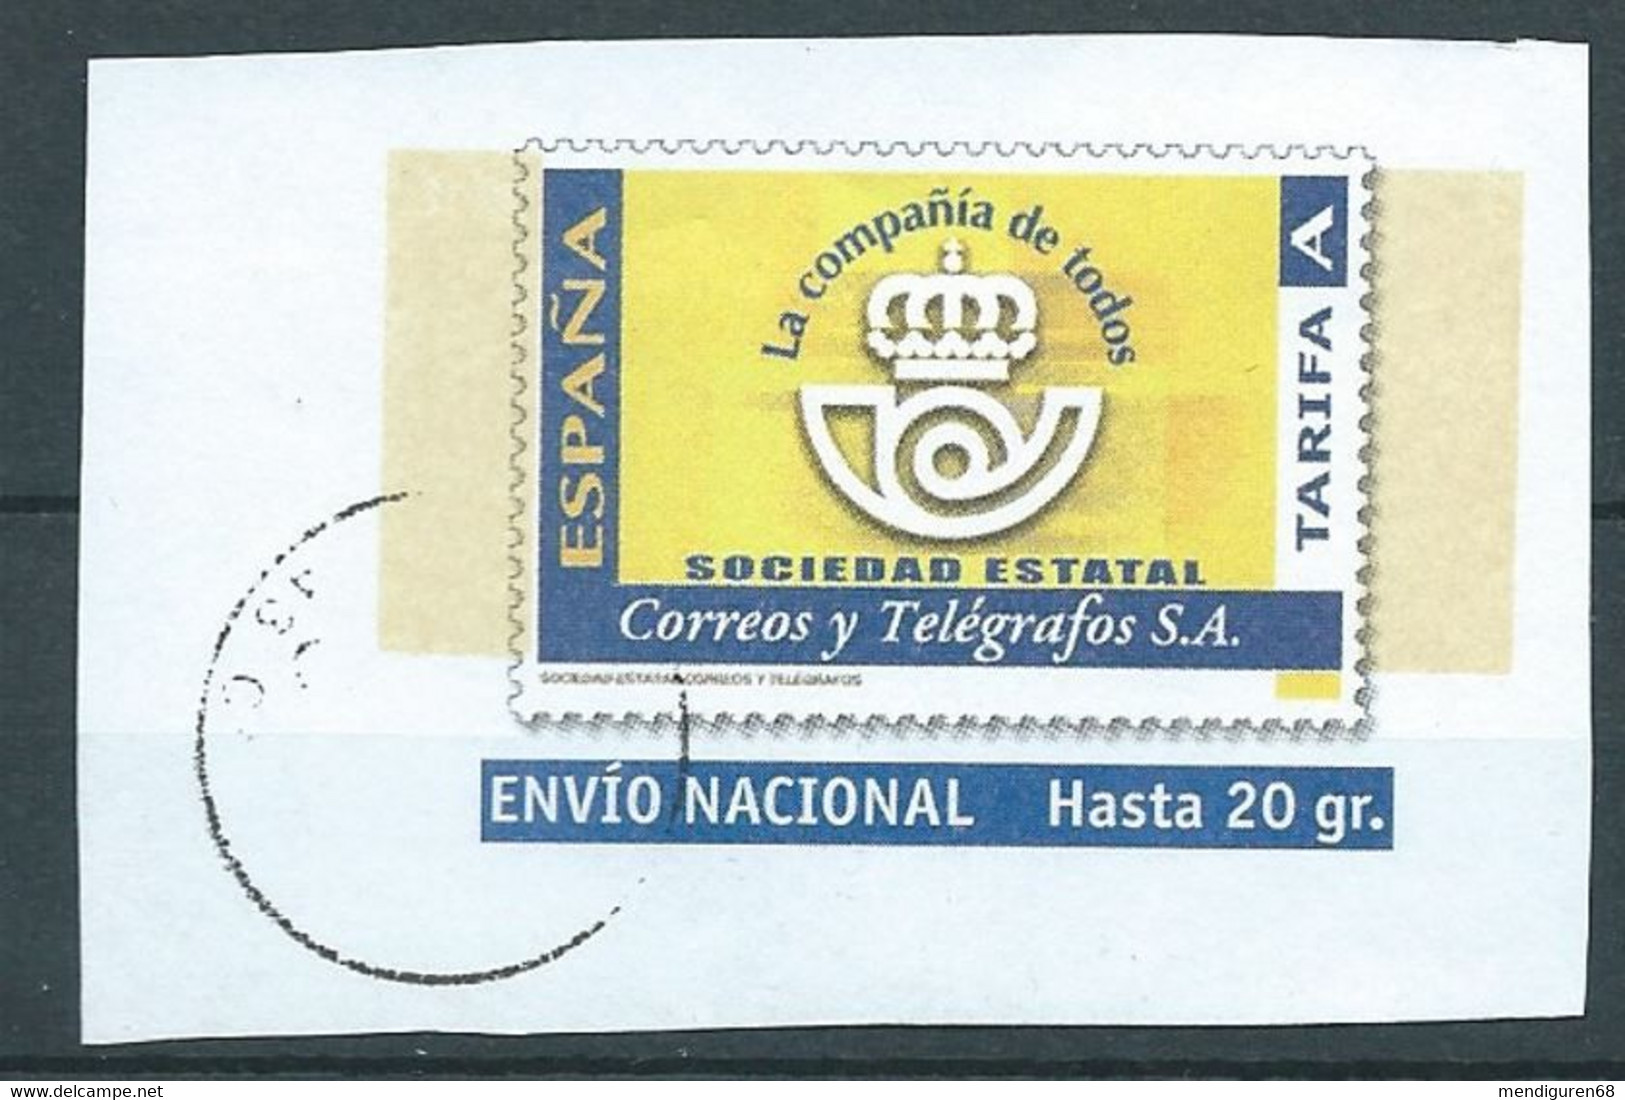 ESPAGNE SPANIEN SPAIN ESPAÑA 2022 LABEL PREFRANCHED ENVELOPE RATE A USED - Postage-Revenue Stamps